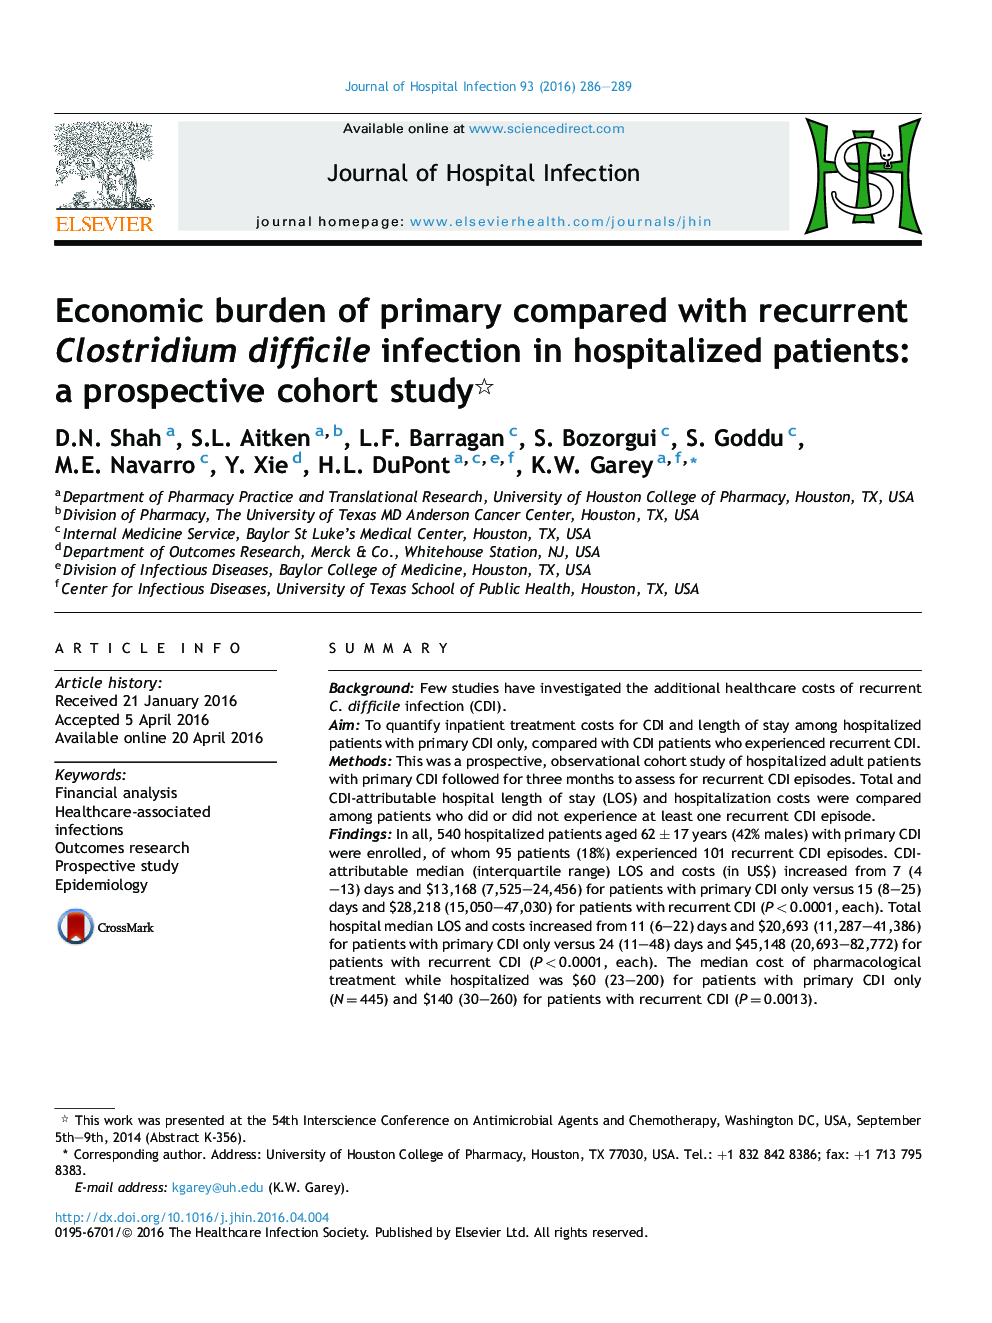 Economic burden of primary compared with recurrent Clostridium difficile infection in hospitalized patients: a prospective cohort study 